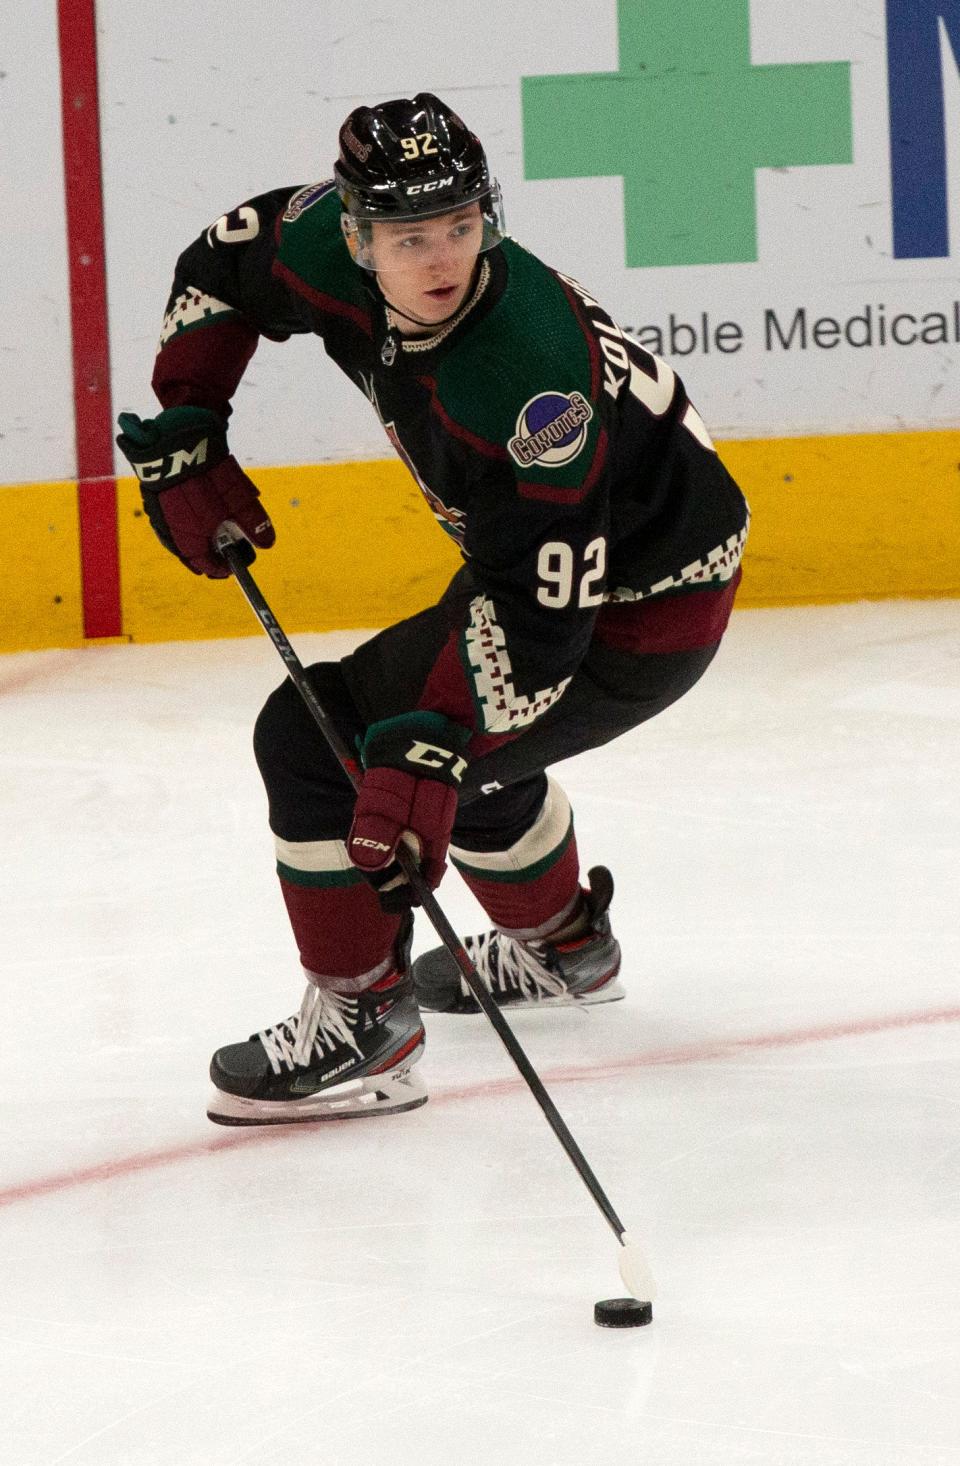 Coyotes rookie prospect Vladislav Kolyachonok controls the puck during the rookie prospects game against the Ducks rookie prospects at the Gila River Arena in Glendale on September 20, 2021.